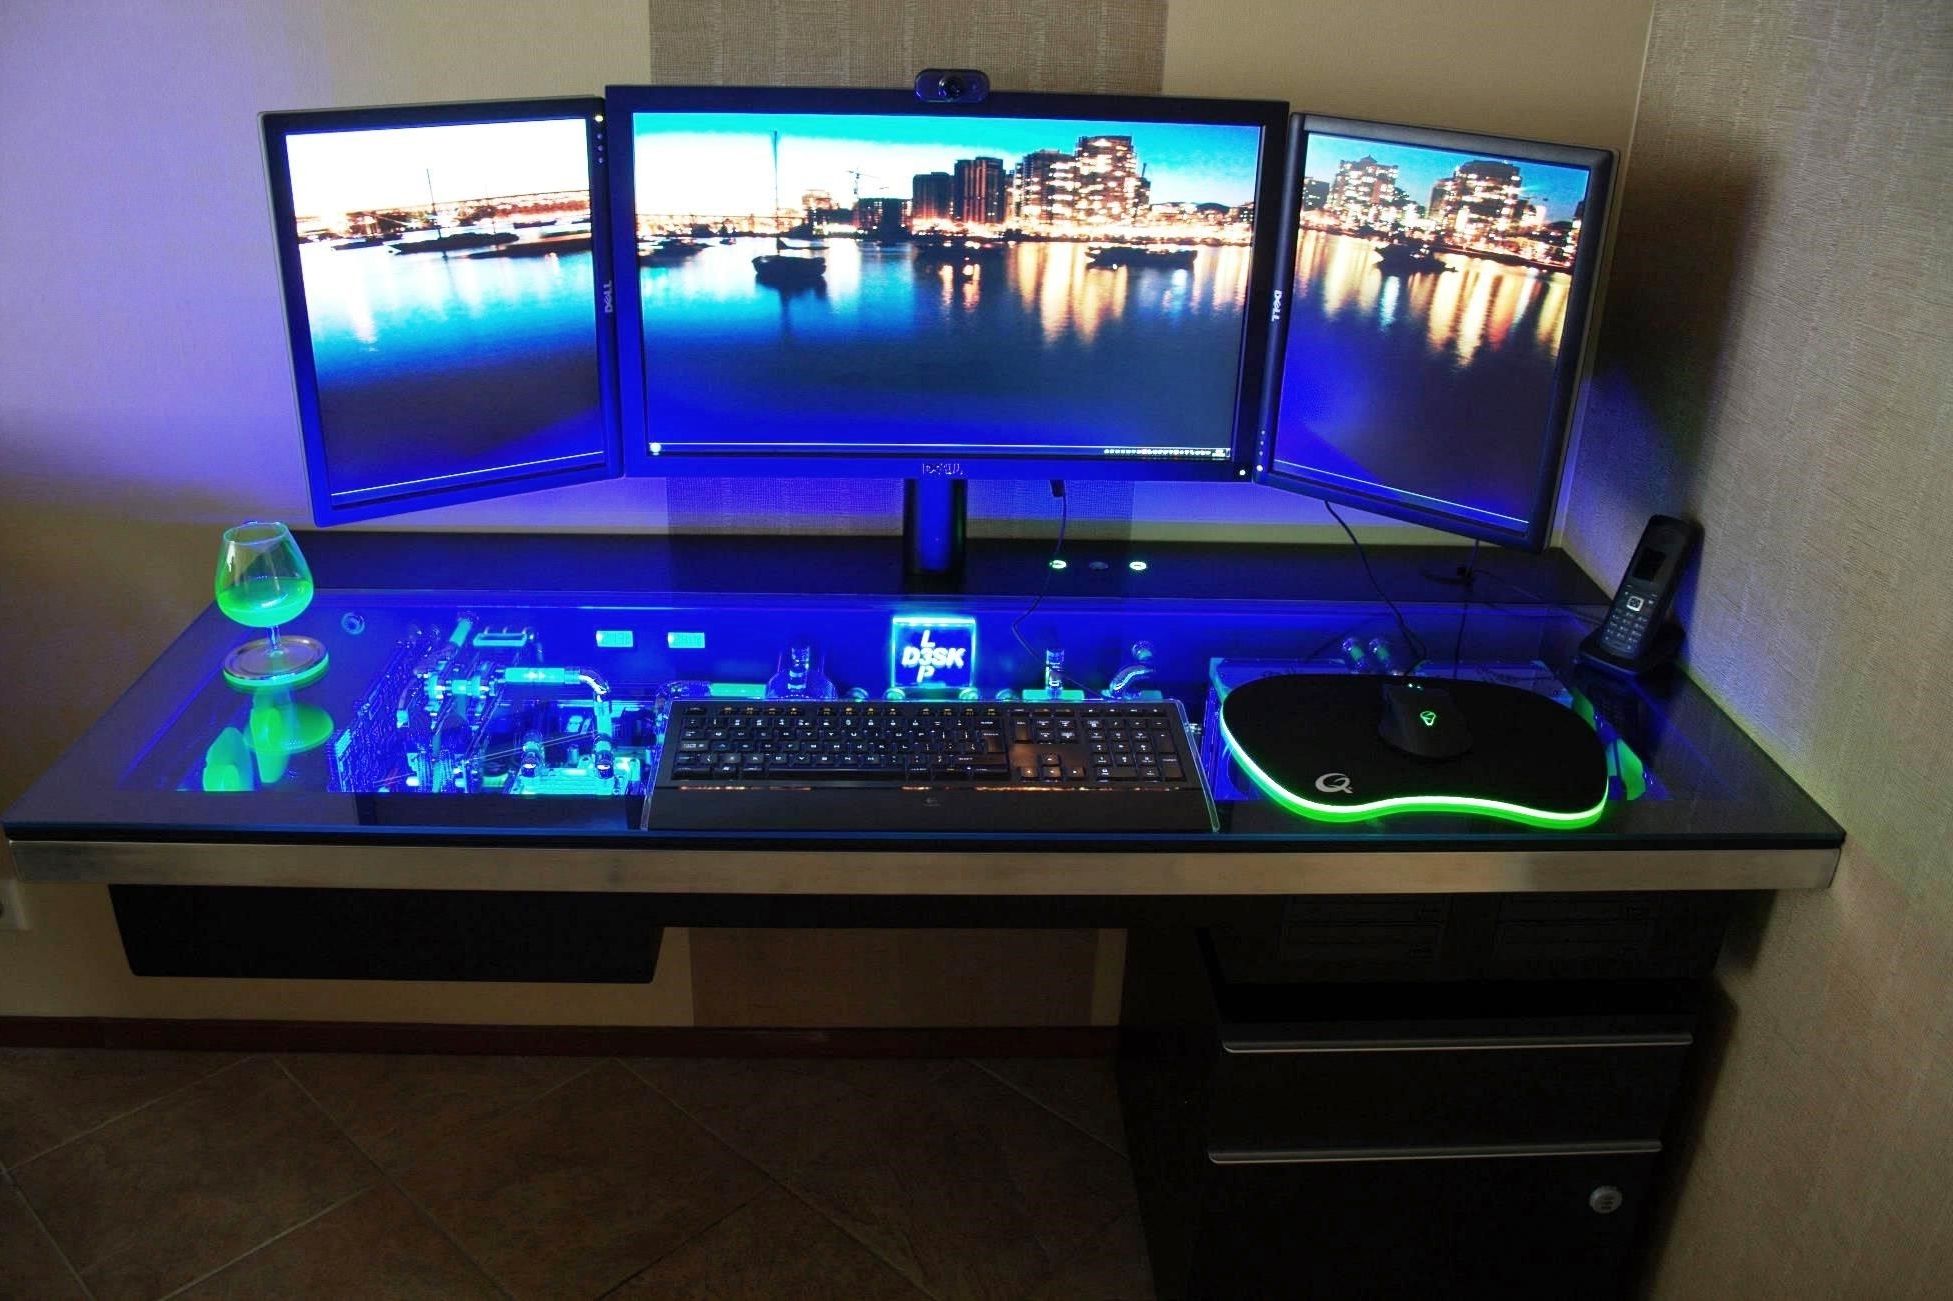 Awesome Cool Gaming Computer Desks Pics Design Inspiration Intended For Trendy Gaming Computer Desks (View 5 of 20)